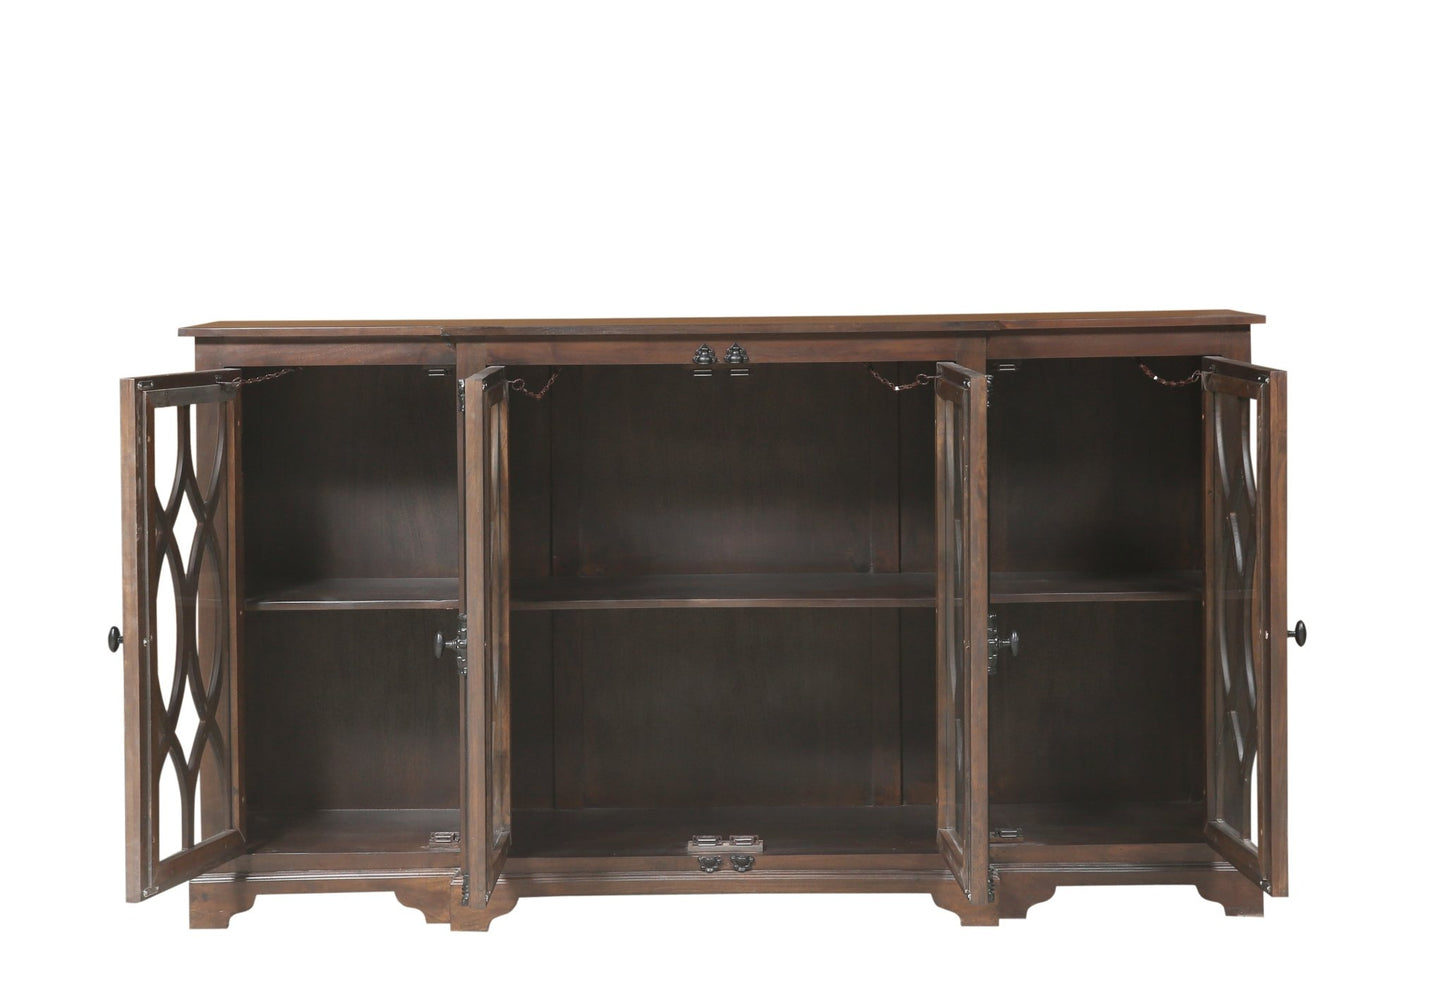 Clairton 72" 4 Door Sideboard - Natural + Black - The Furnishery